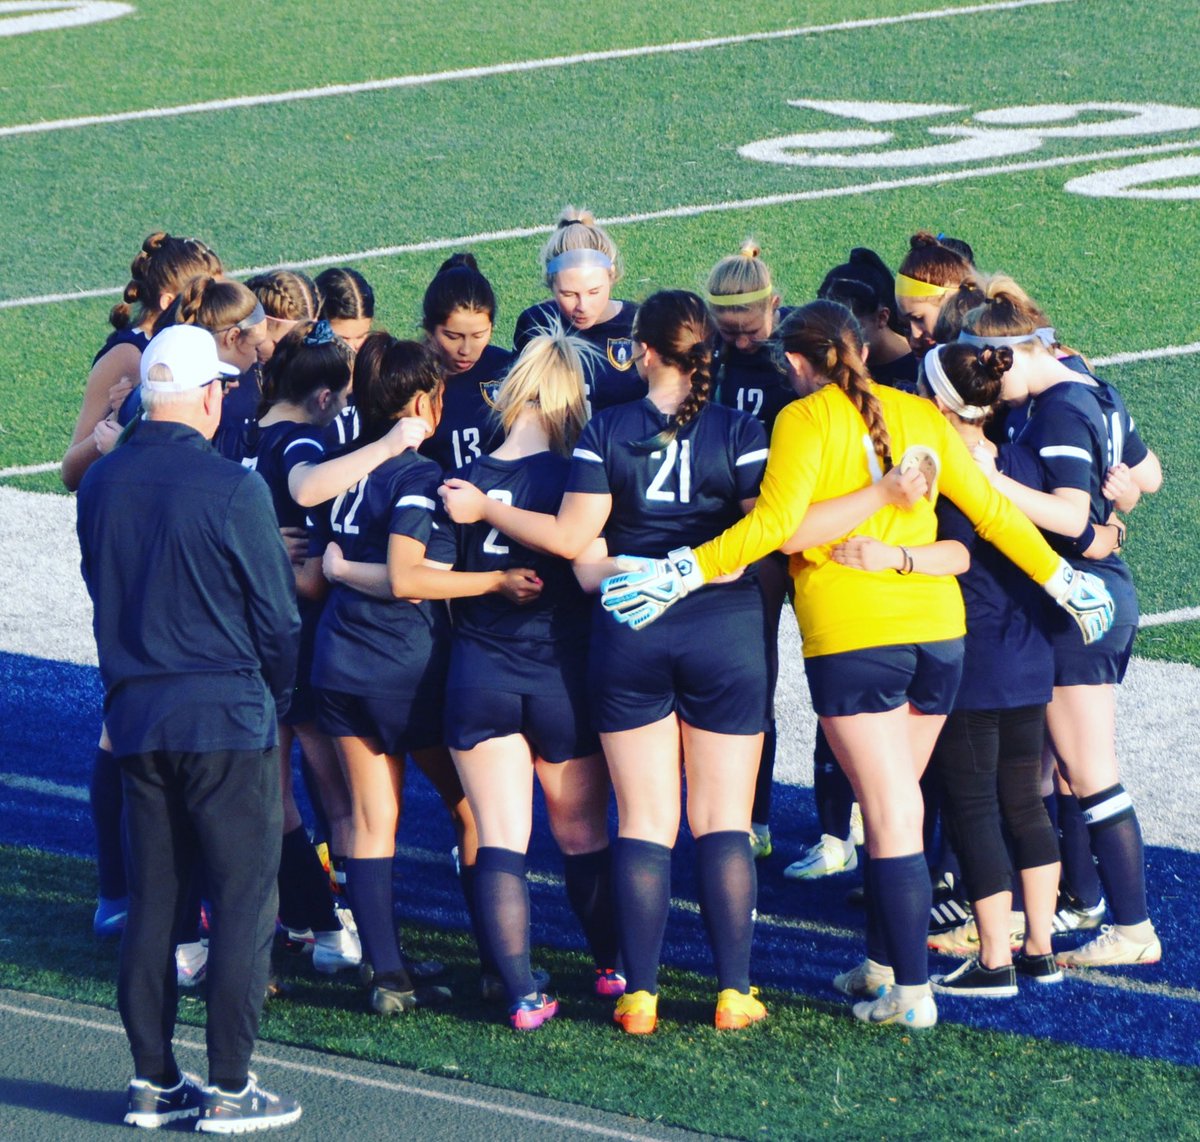 Definitely not the results we hoped for after a stand out regular season but we started together and we finished together!  
14-0 in the district
81 goals for
0 against
2023 District Champs 
2-1 Final game ending in 2 OT’s.
We’ll take that!! 
#AyyyHeights #LadyJackets